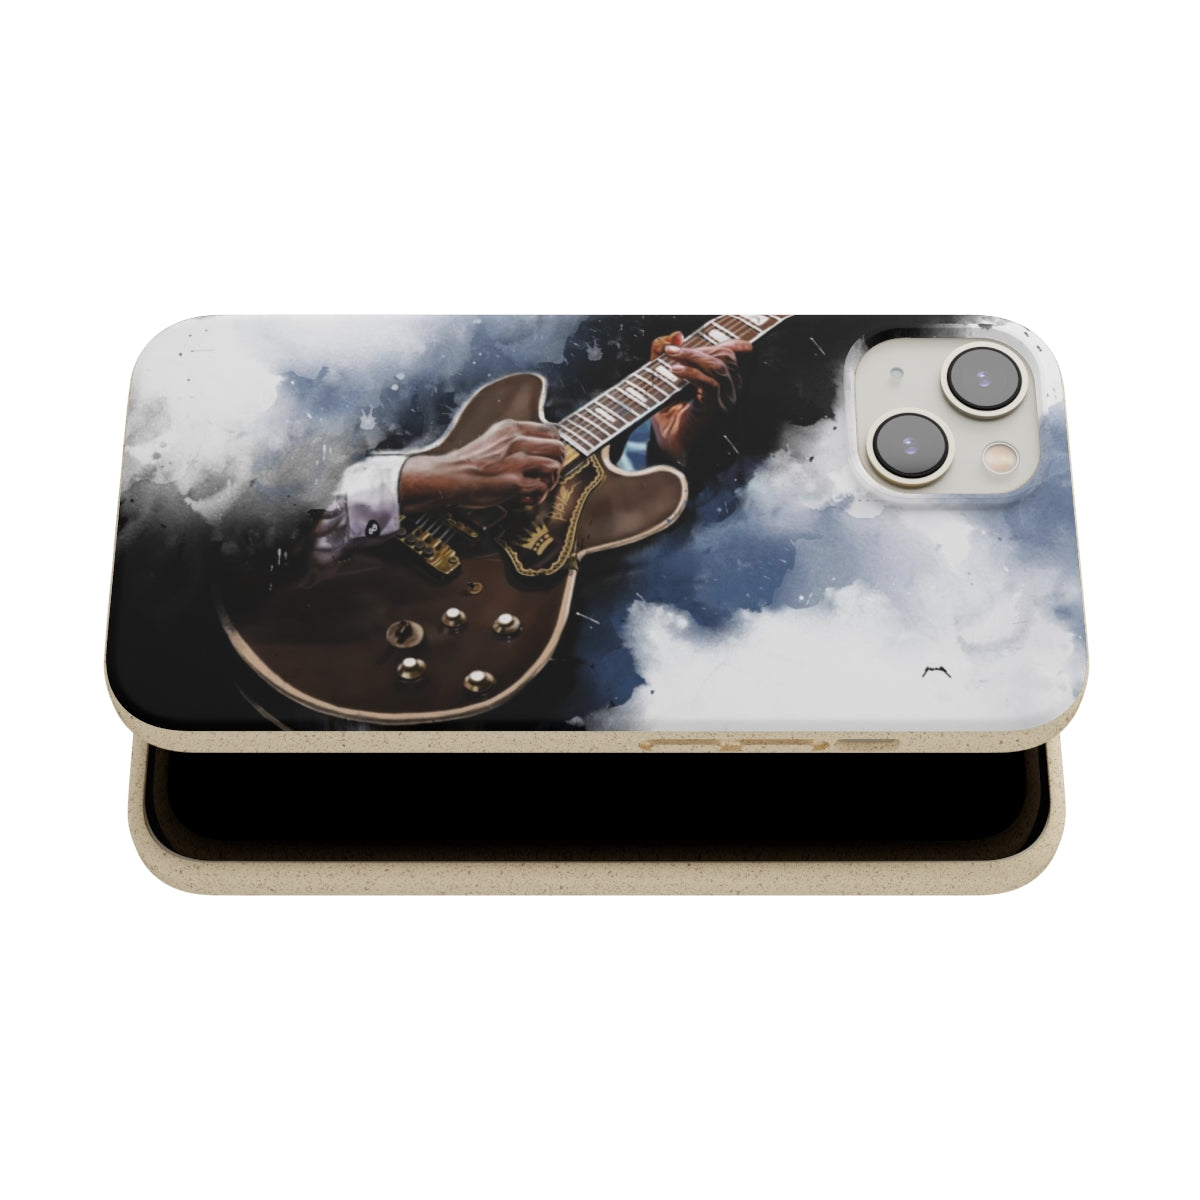 Digital painting of a black electric guitar with hands printed on a biodegradable iphone phone case